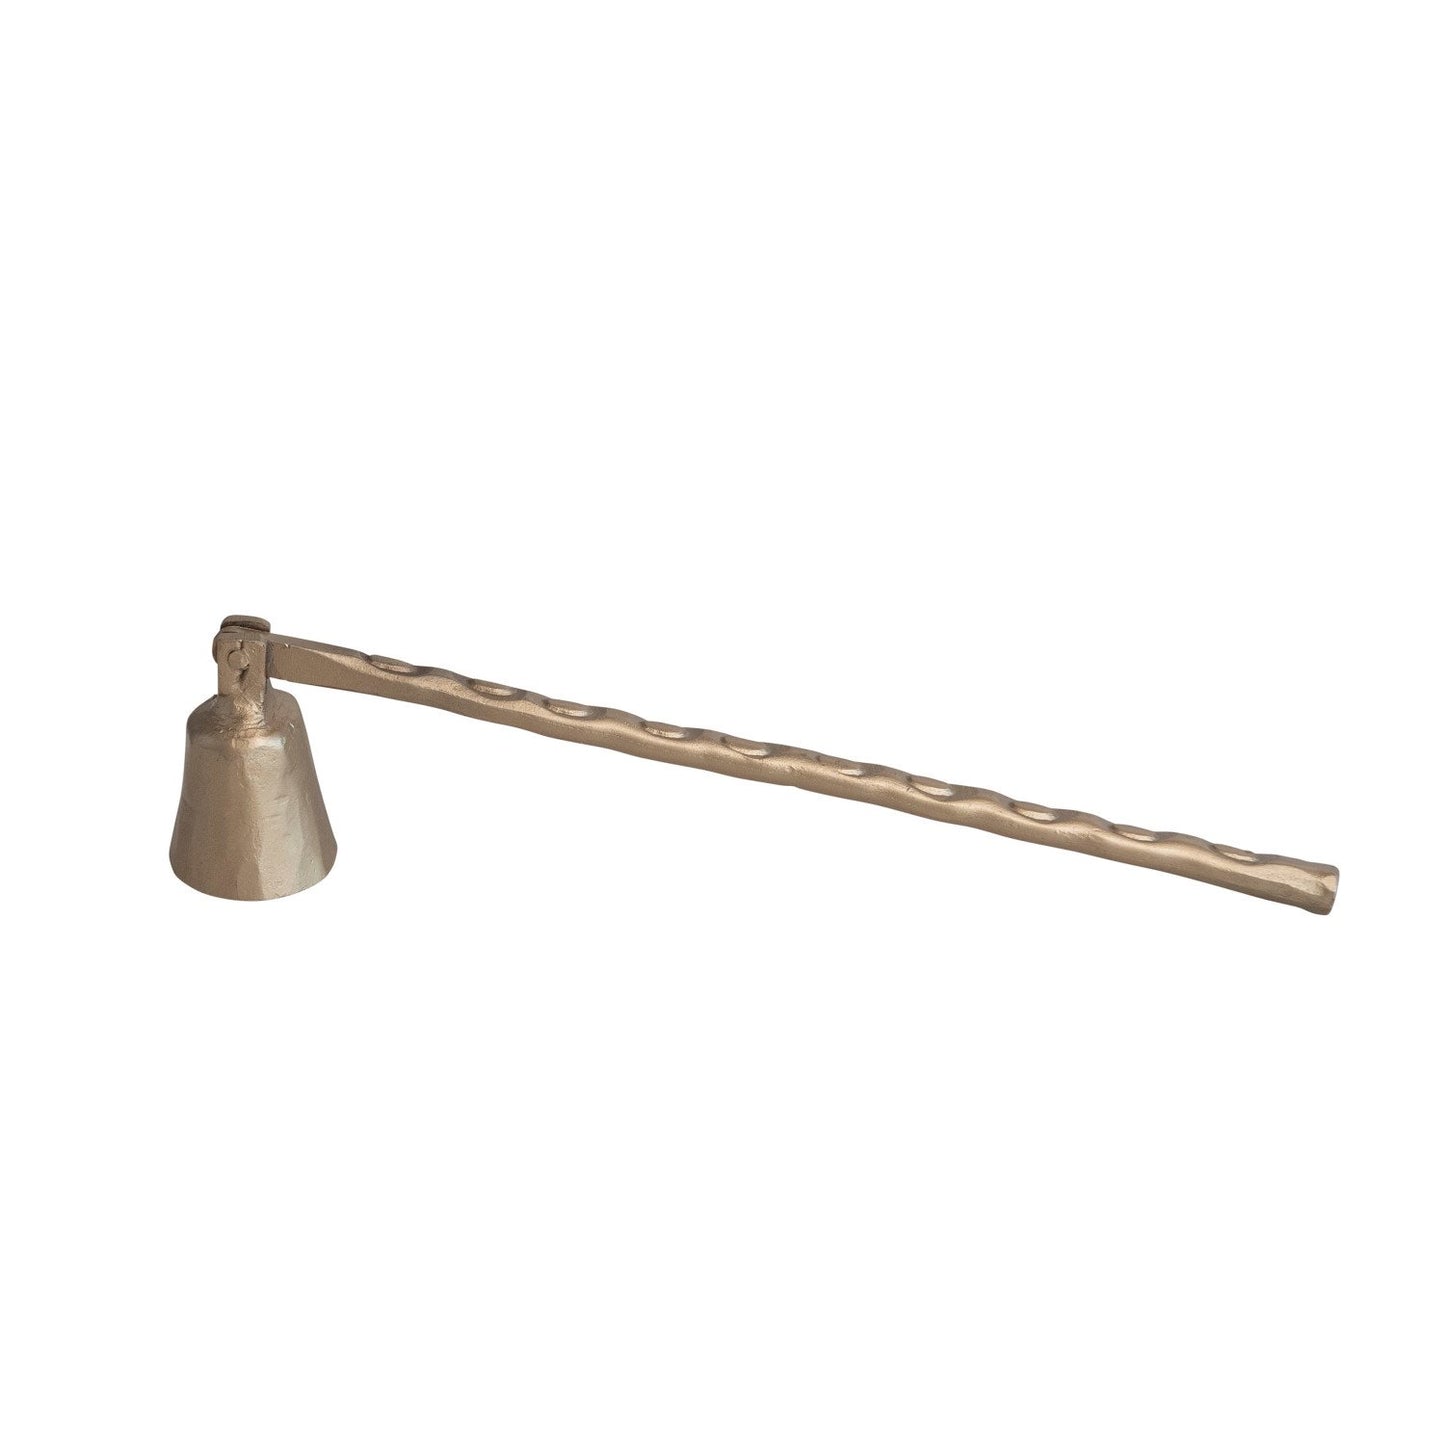 Hand-Forged Metal Candle Snuffer, Antique Gold Finish